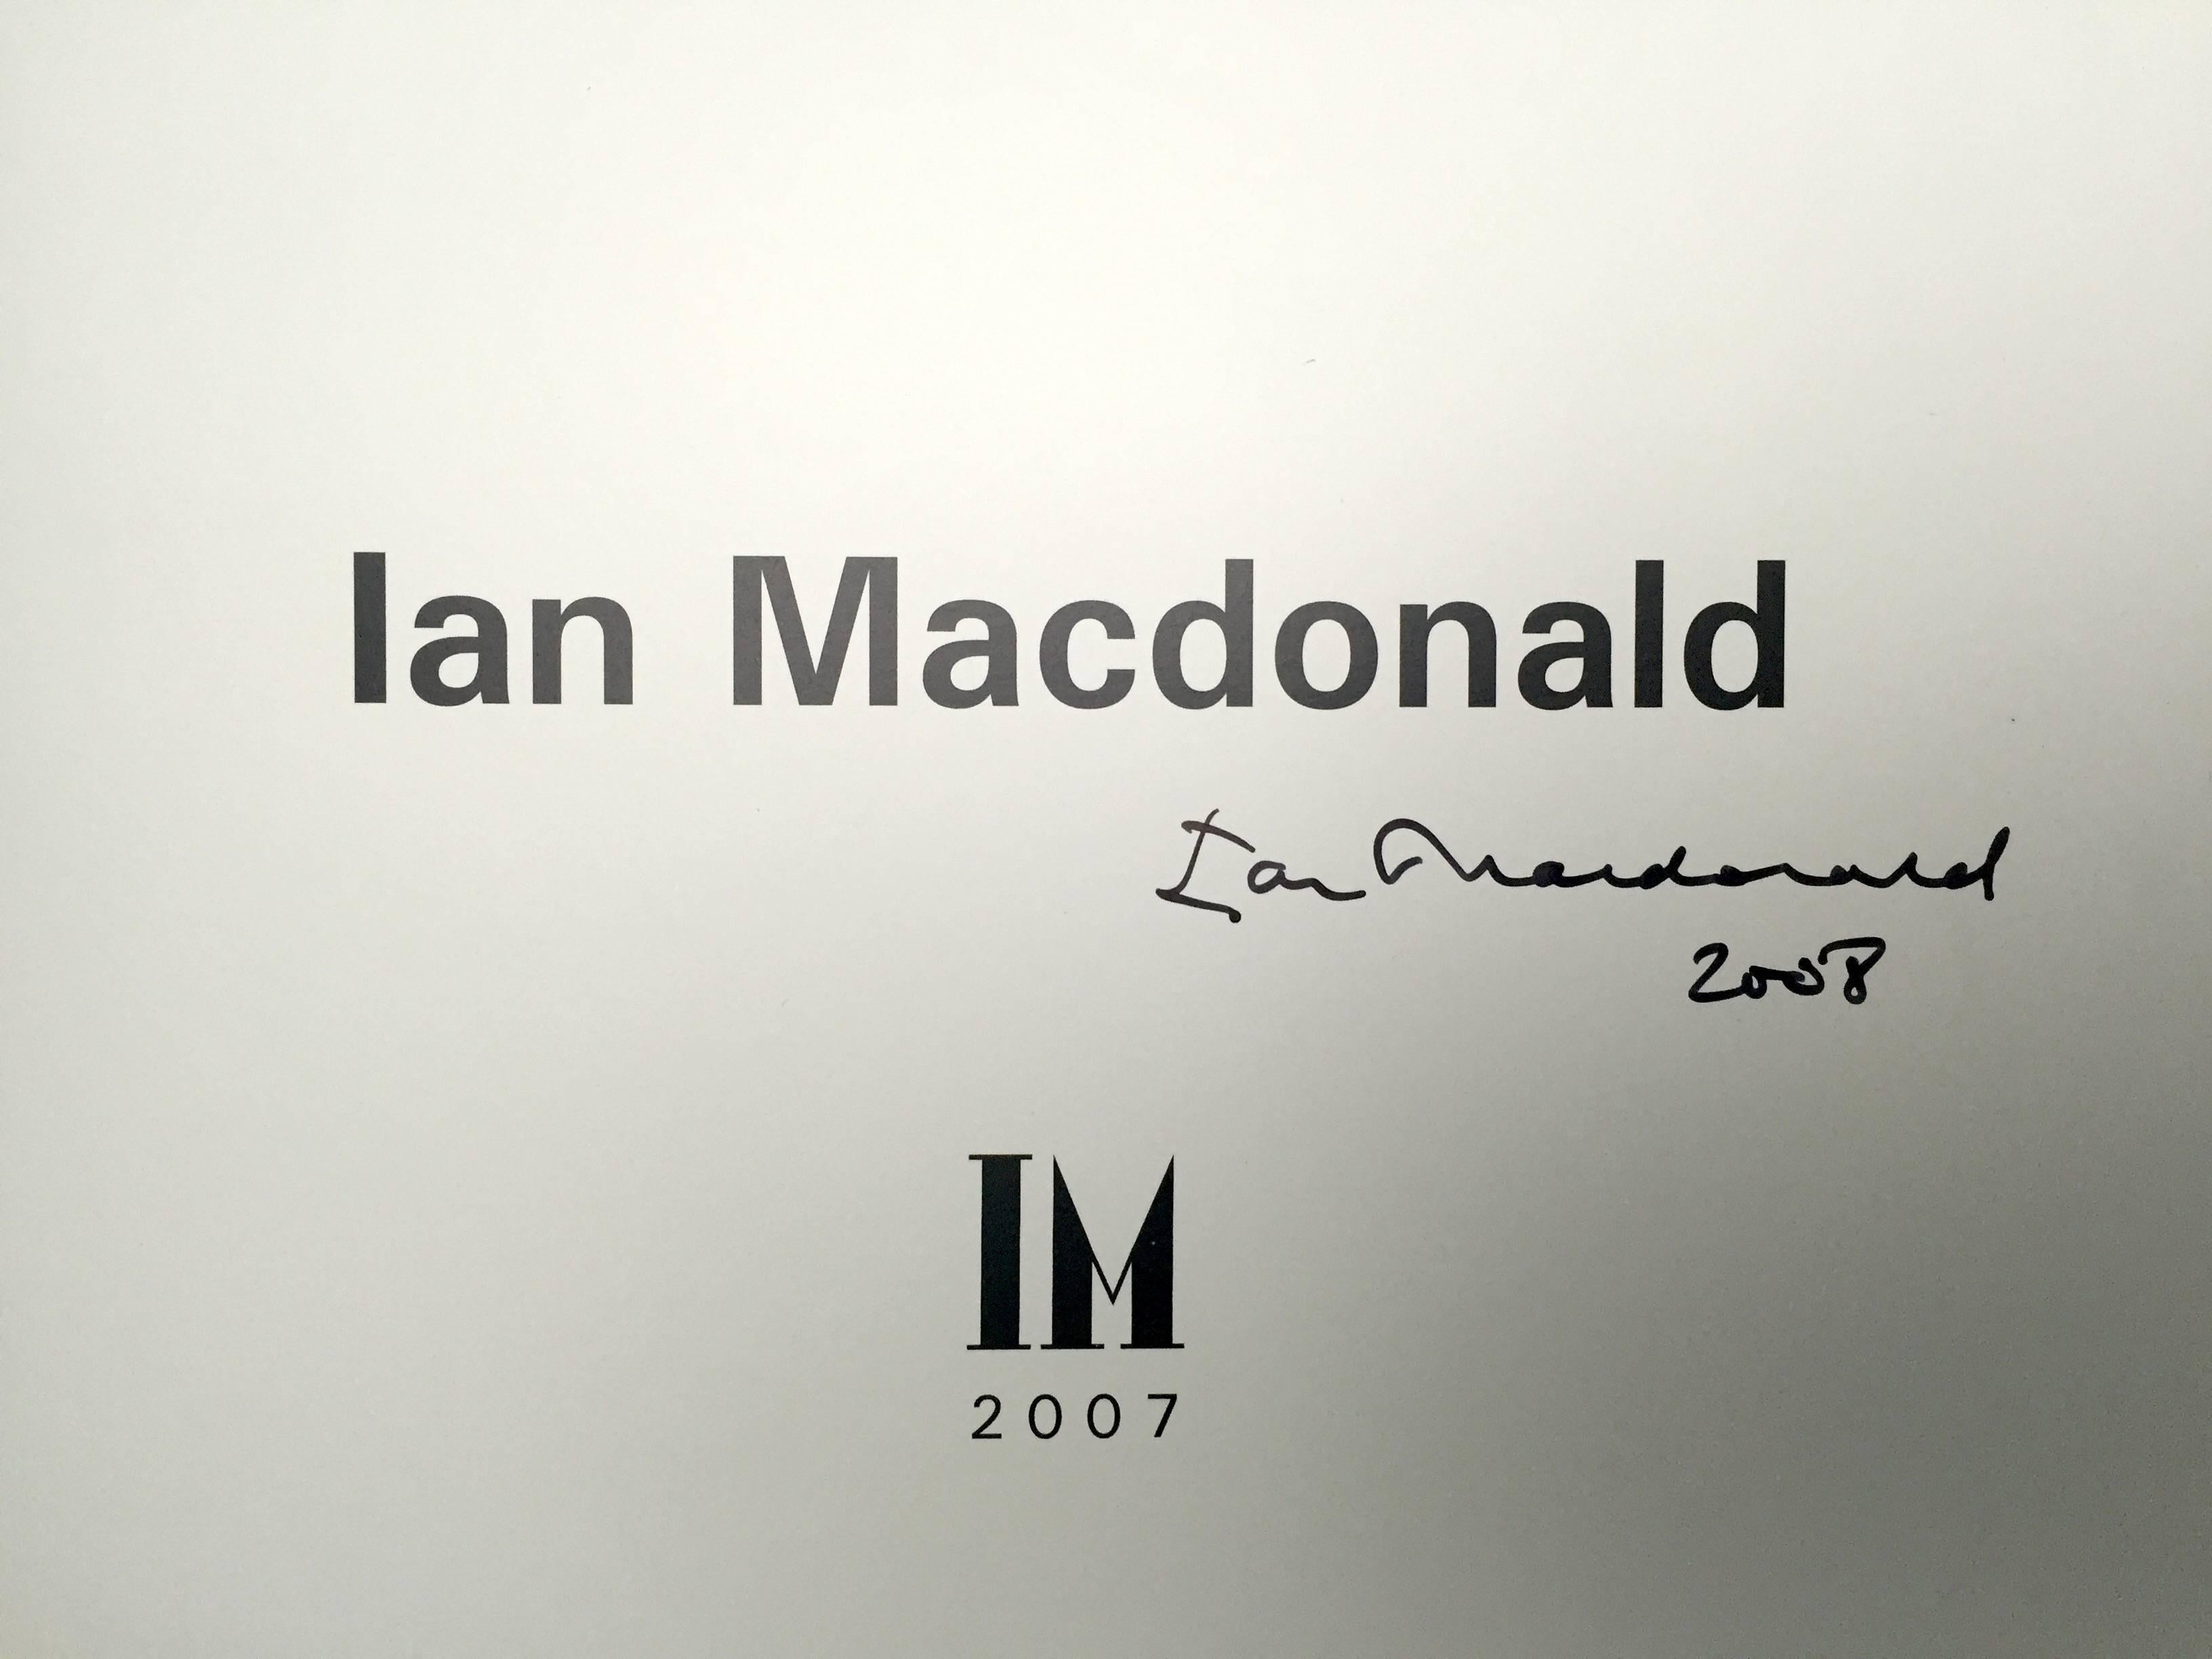 First edition, published by Ian Macdonald, 2007.

This sensitive black and white photo series documents everyday life at Eton College. Ian Macdonald, who was artist in residence between 2006 and 2007, contrasts the familiar traditional aspects of